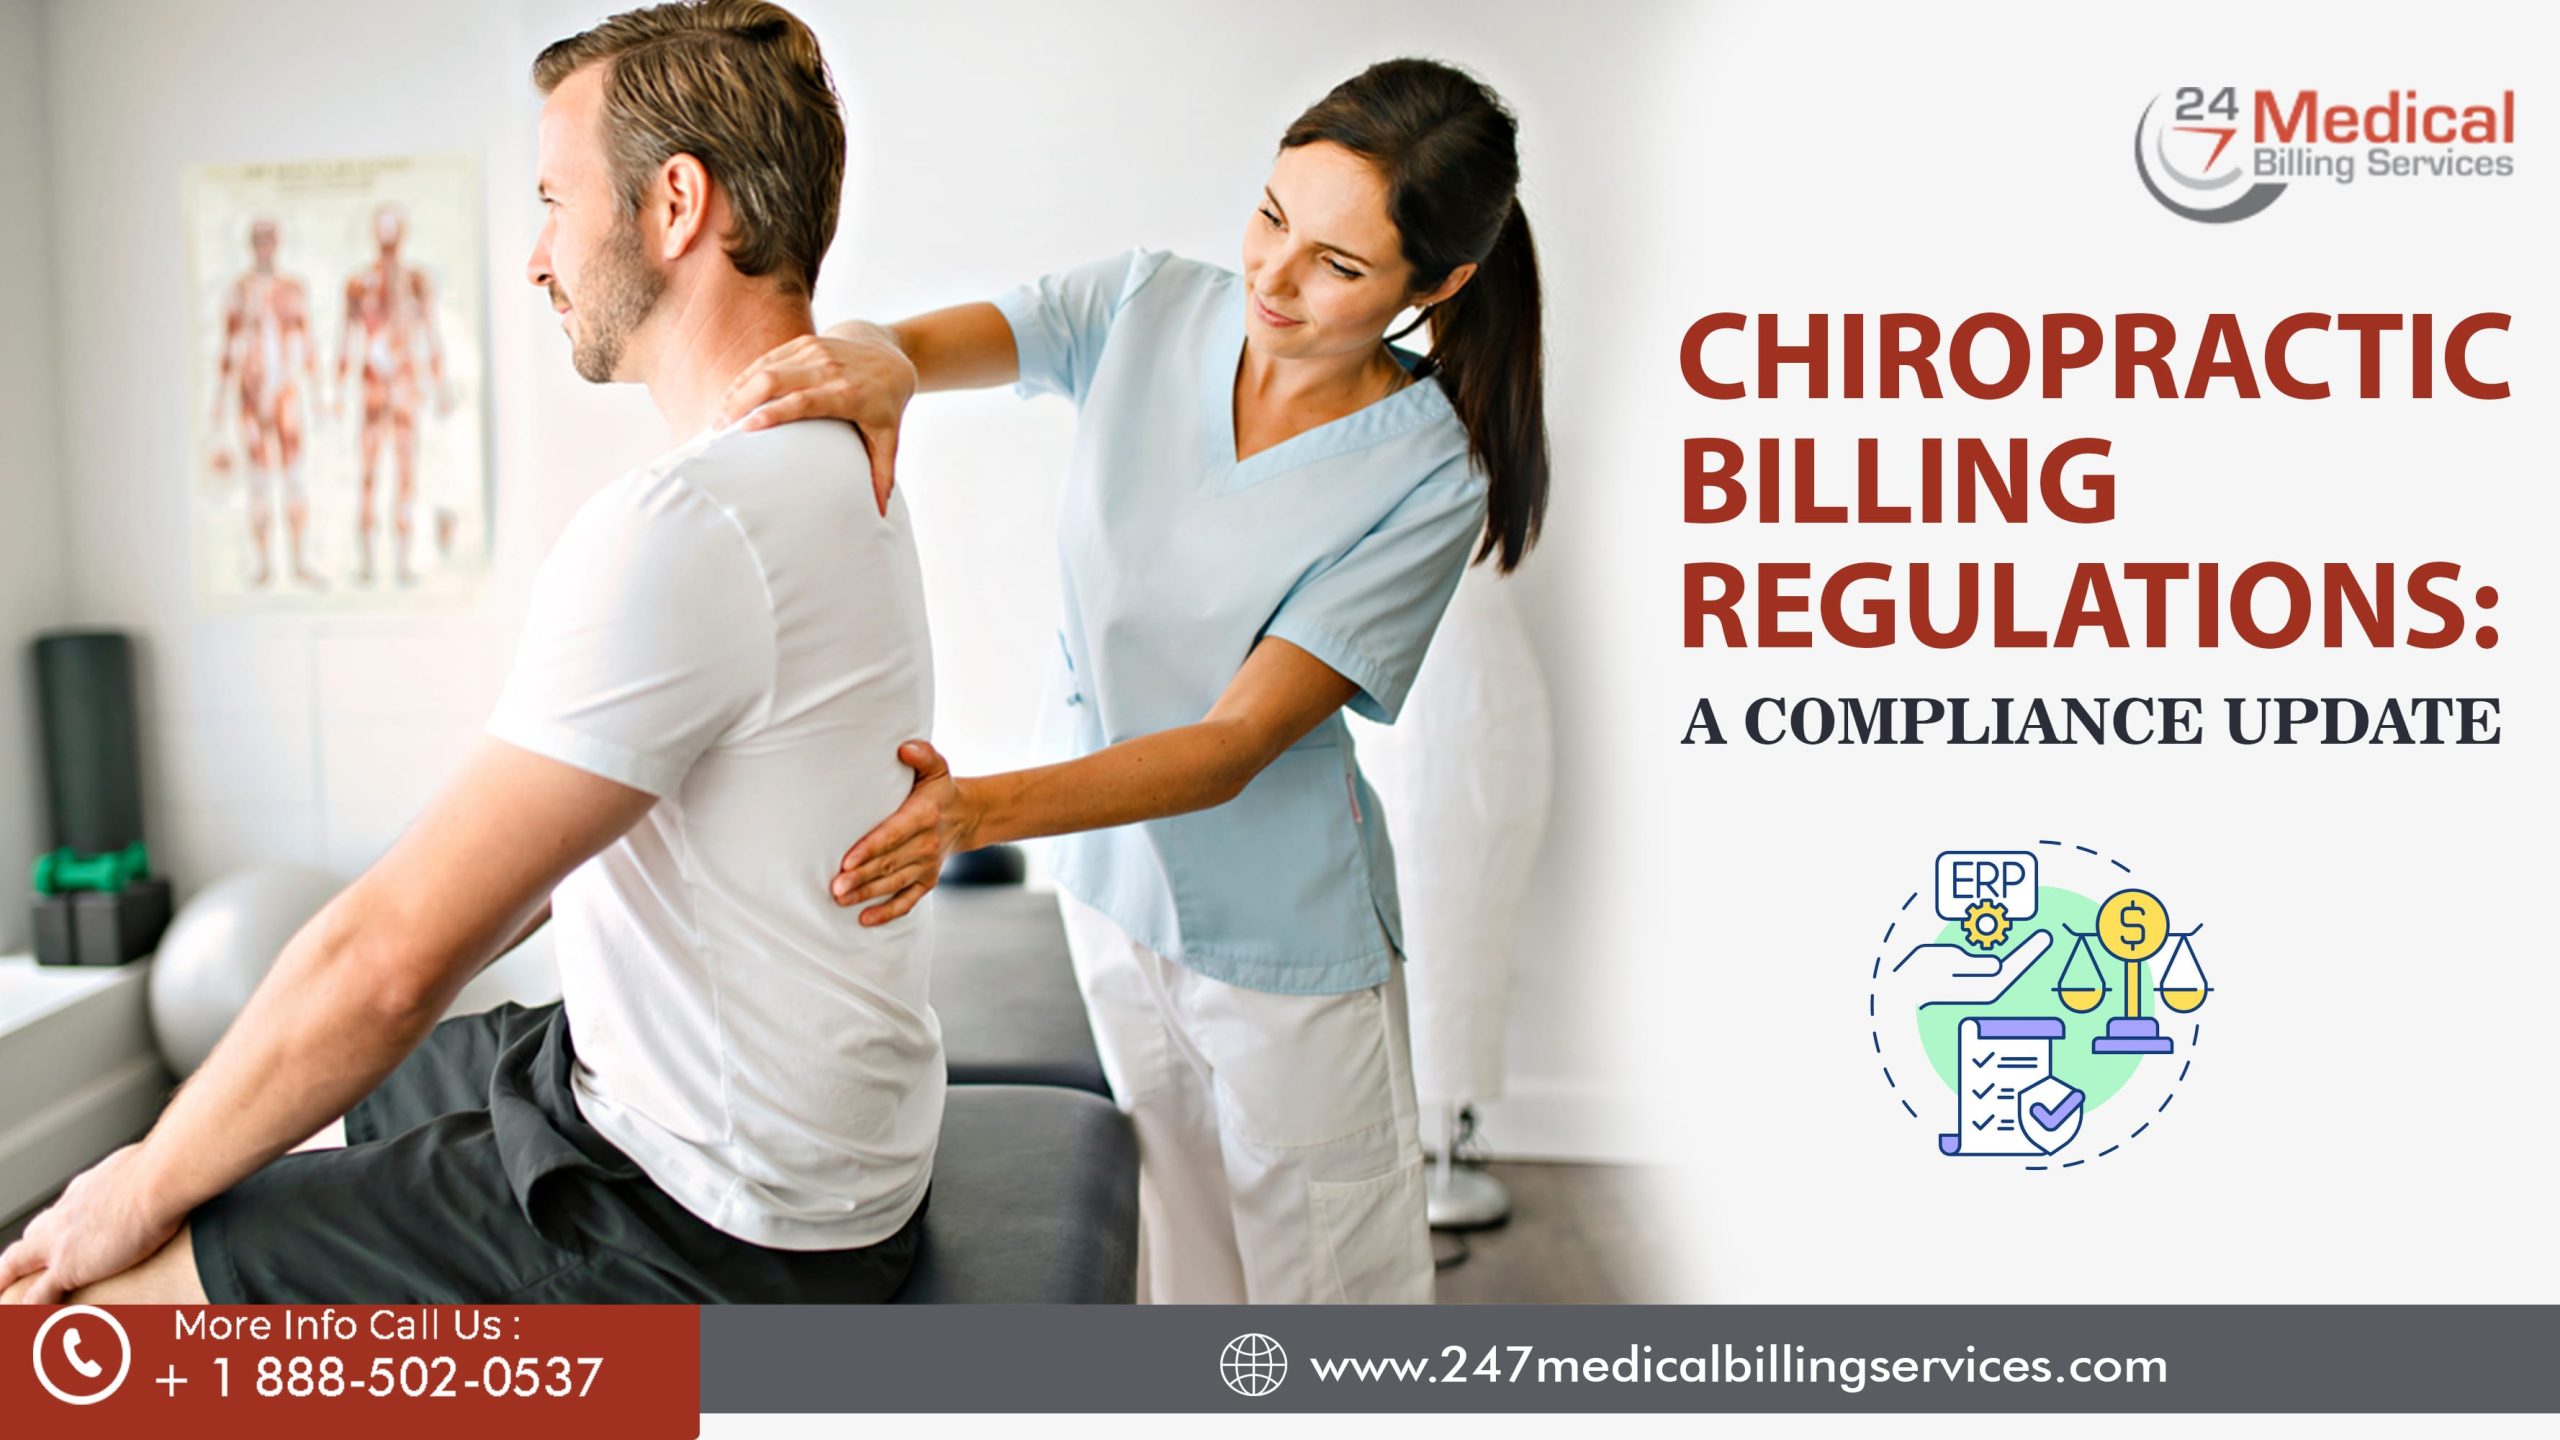 Access comprehensive updates on chiropractic billing regulations and compliance to streamline your practice and avoid potential penalties.